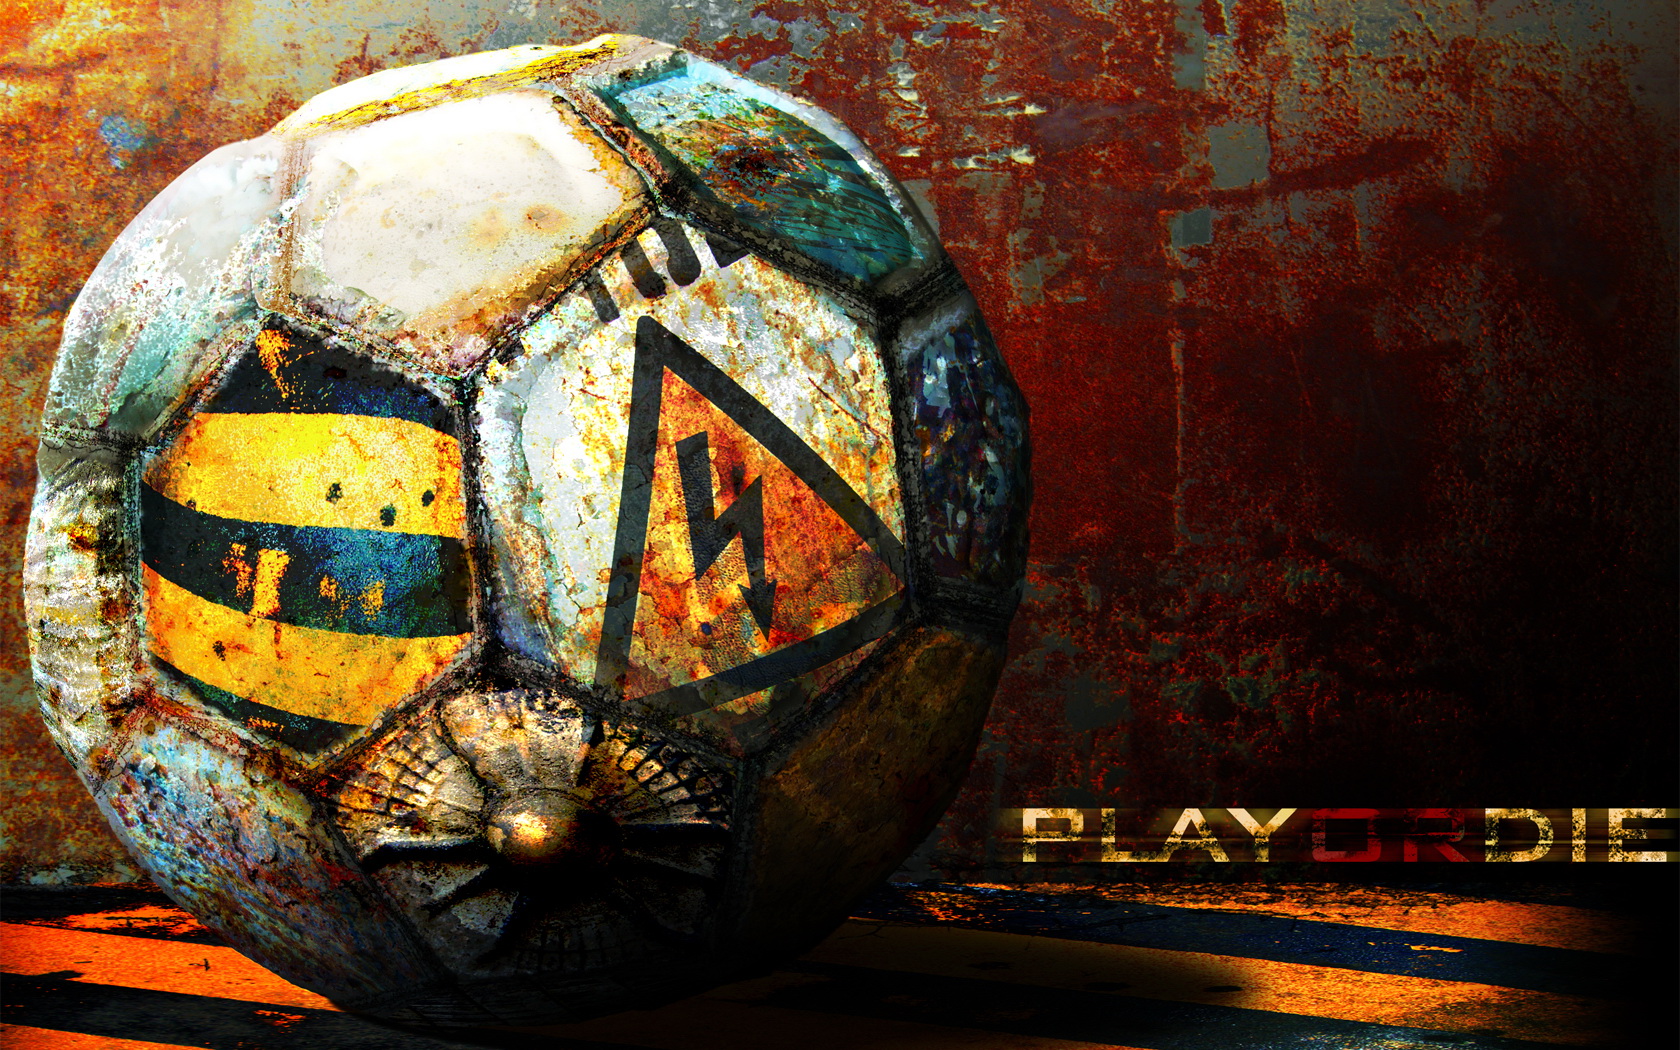 168 Soccer HD Wallpapers | Backgrounds - Wallpaper Abyss